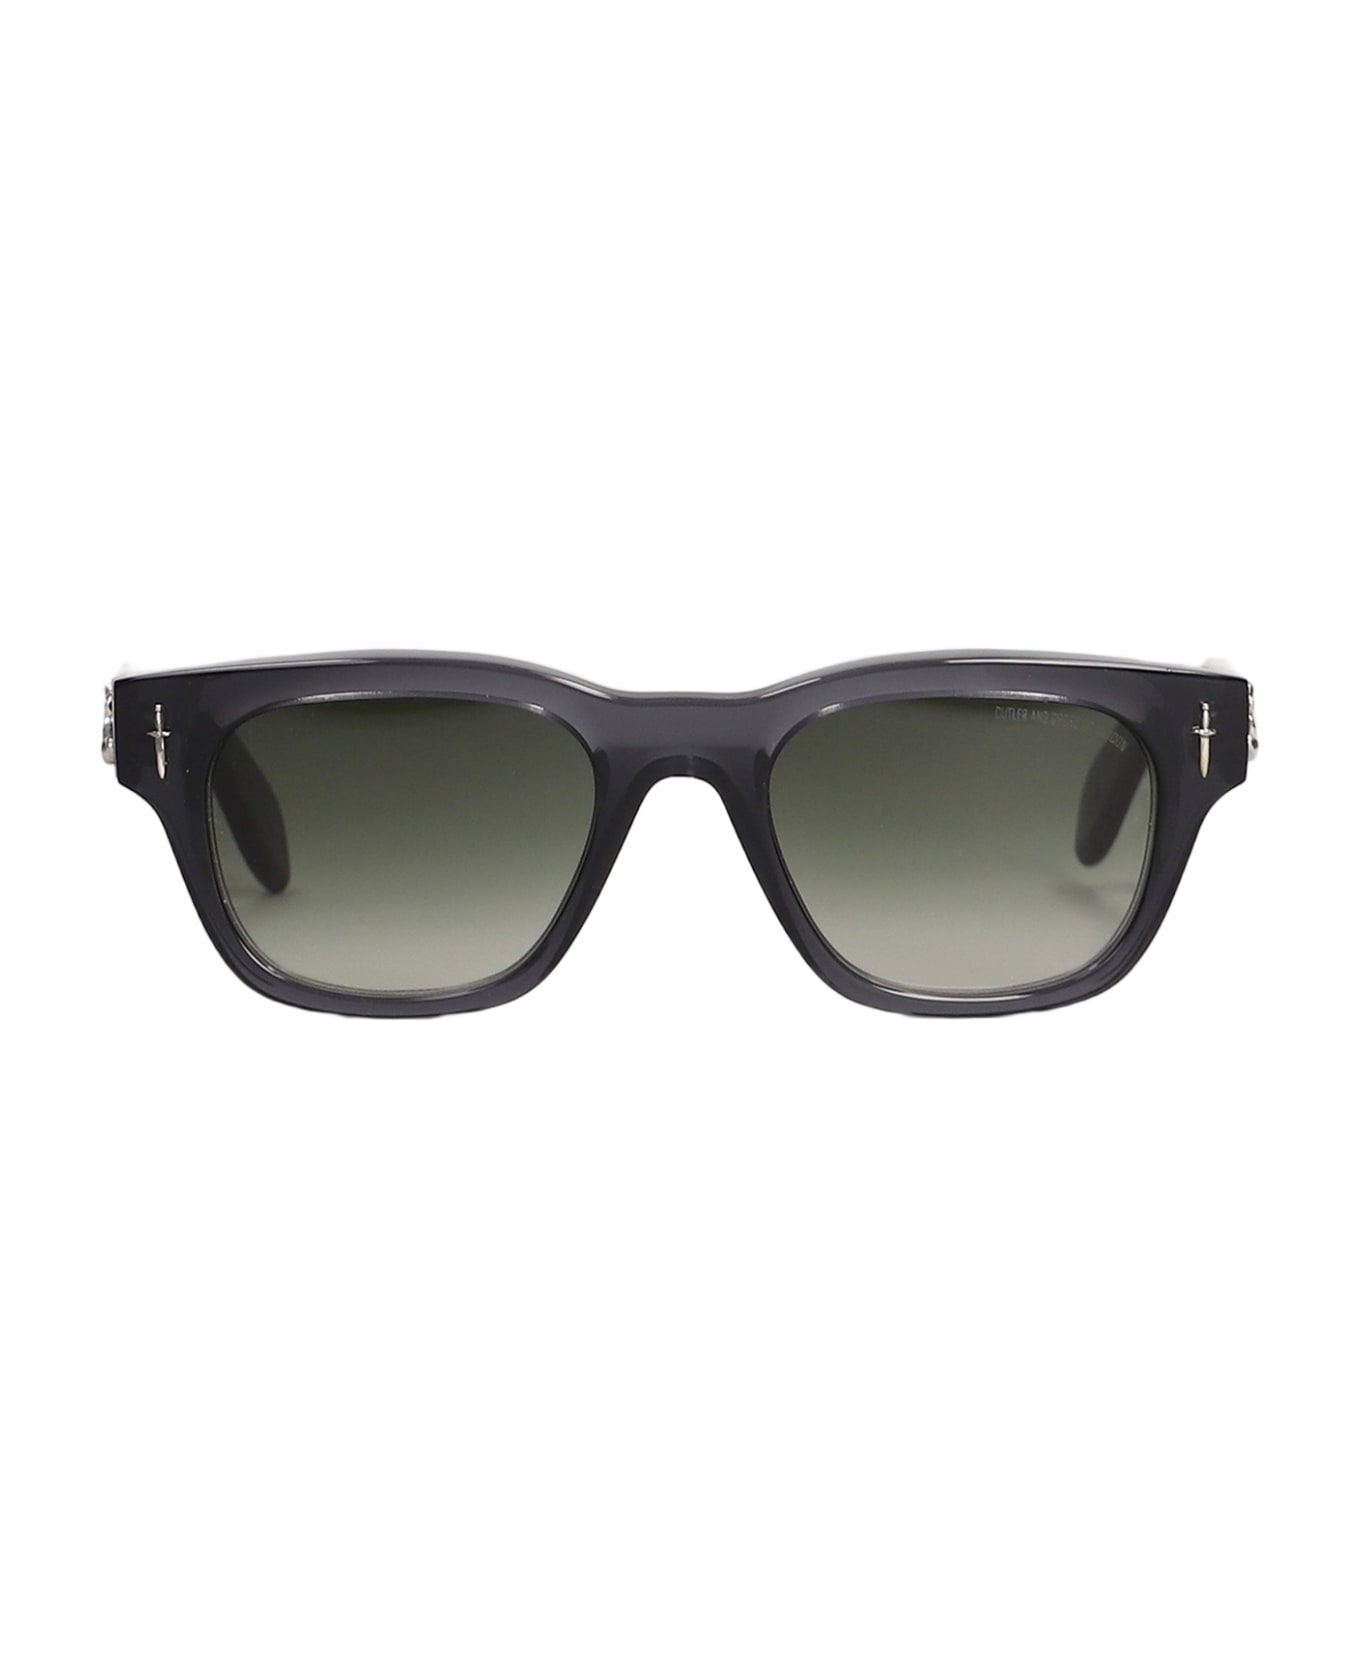 Cutler and Gross The Great Frog Sunglasses In Grey Acetate - grey